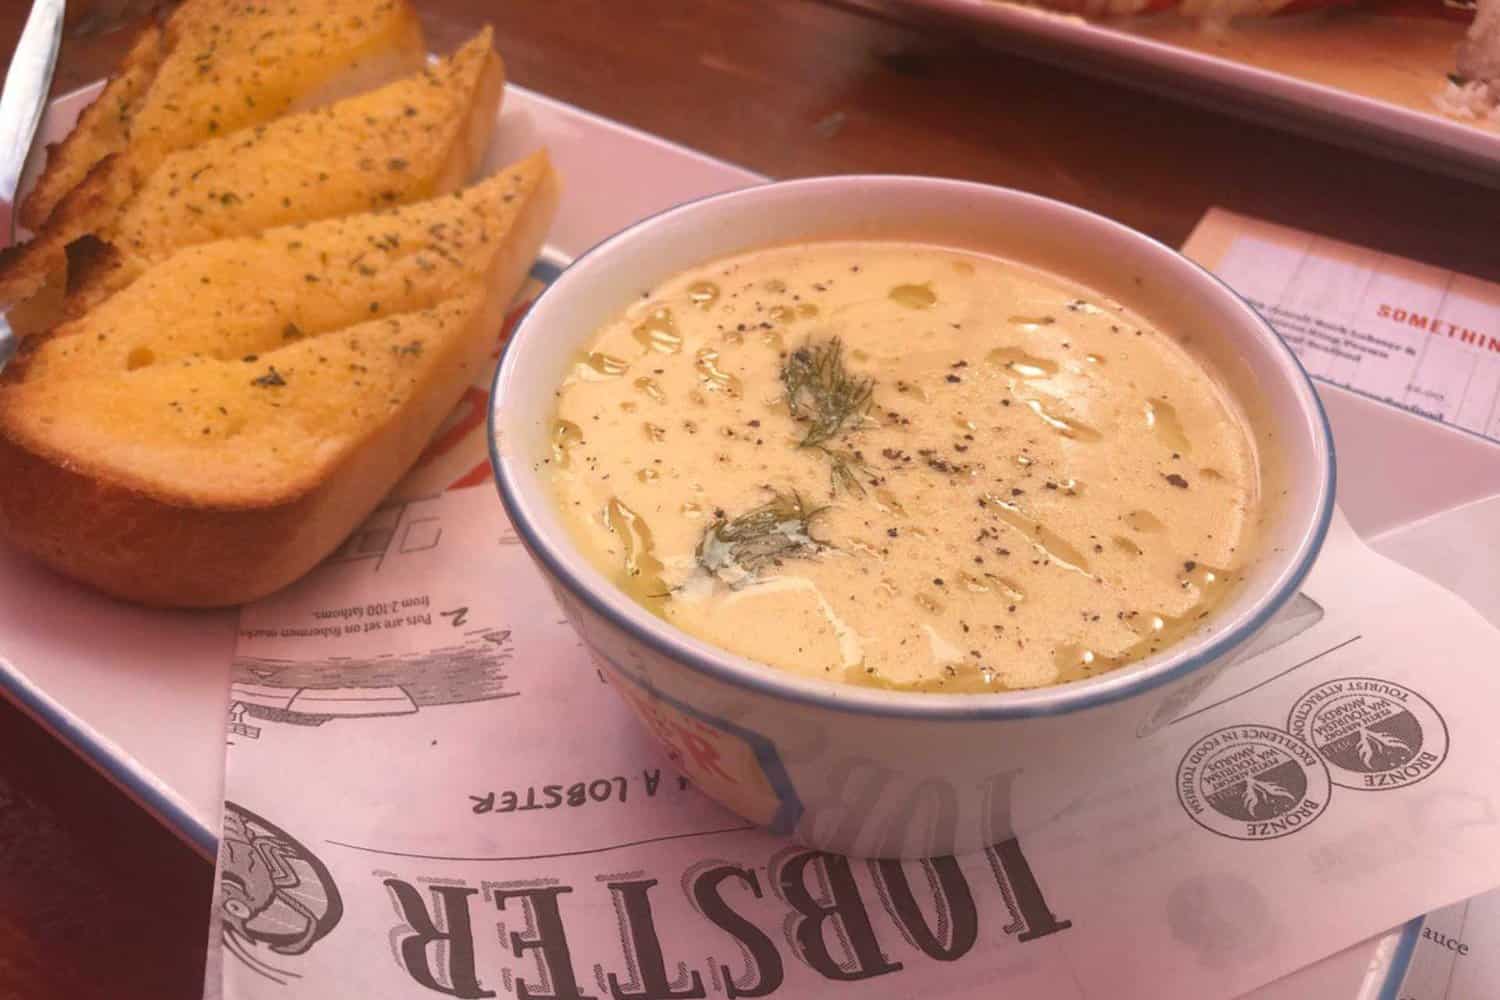 Mouthwatering clam chowder served in a bowl, accompanied by a side of garlic bread at the Lobster Shack, a popular stop on the Perth to Exmouth road trip, offering a taste of local cuisine